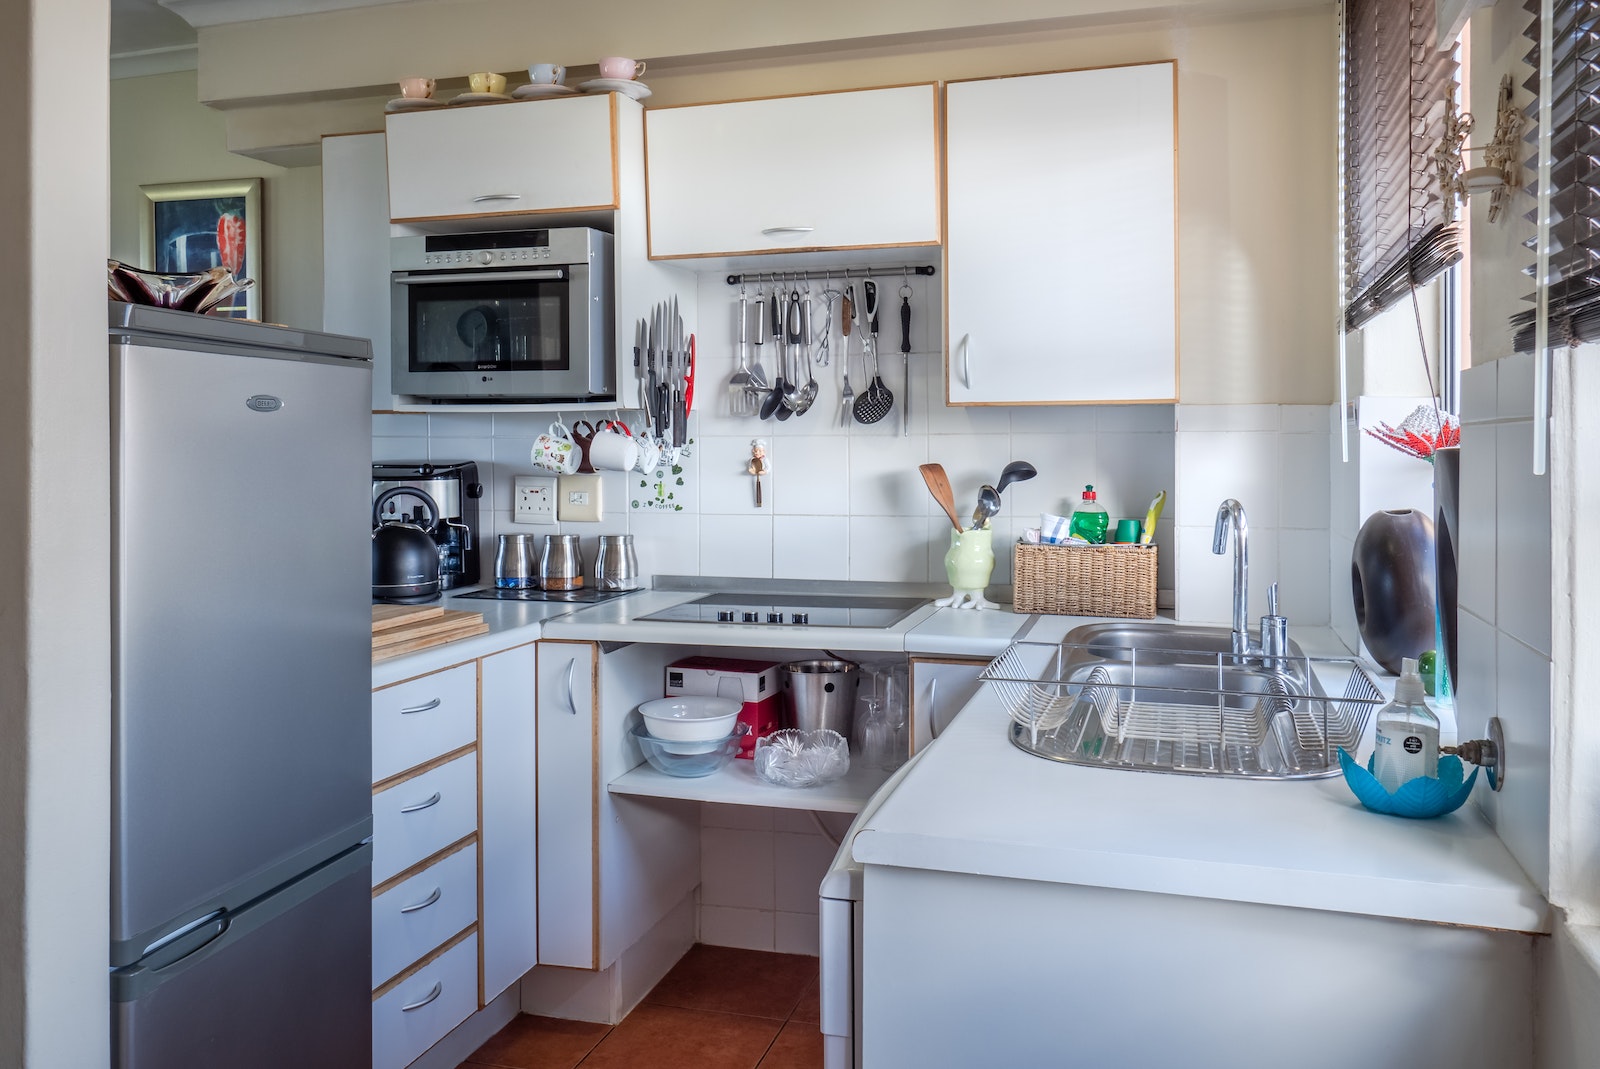 Solutions for Small Kitchens: Organize and Optimize Your Layout